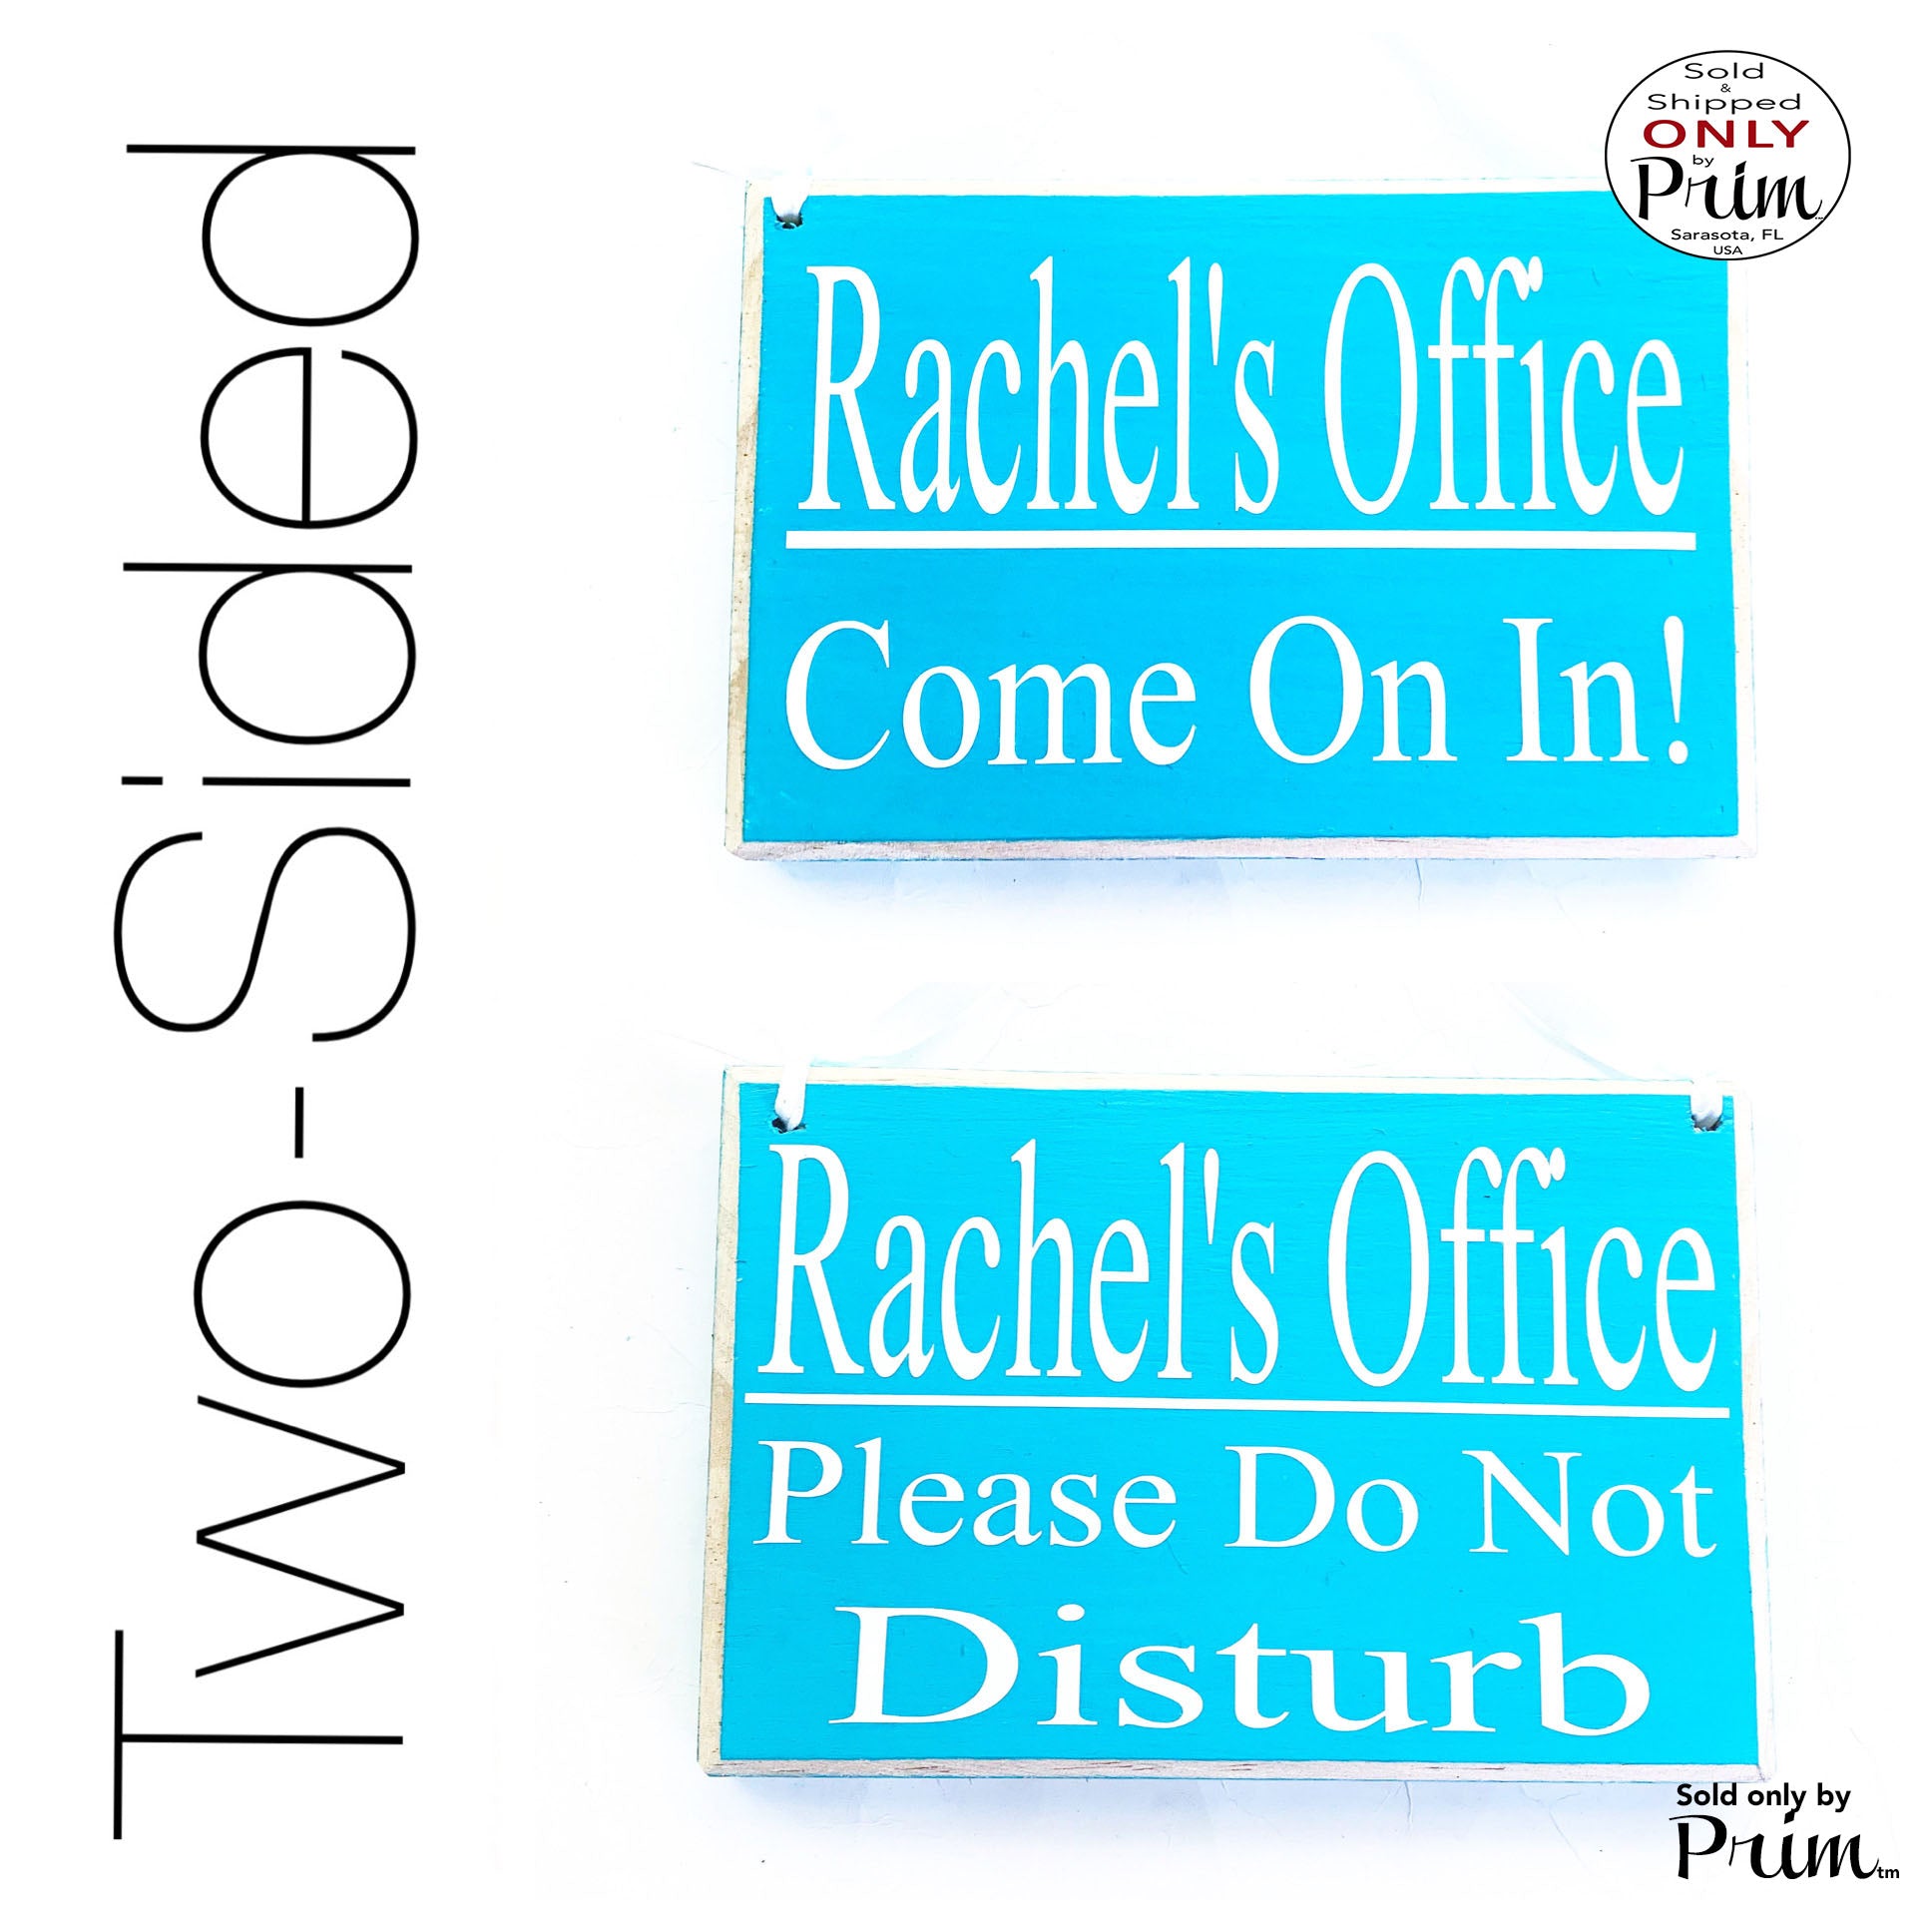 8x6 Custom Name ADD NAME Please Do Not Disturb Welcome Two Sided Custom Wood Sign| Home Office Business In Session Meeting Conference Plaque Designs by Prim